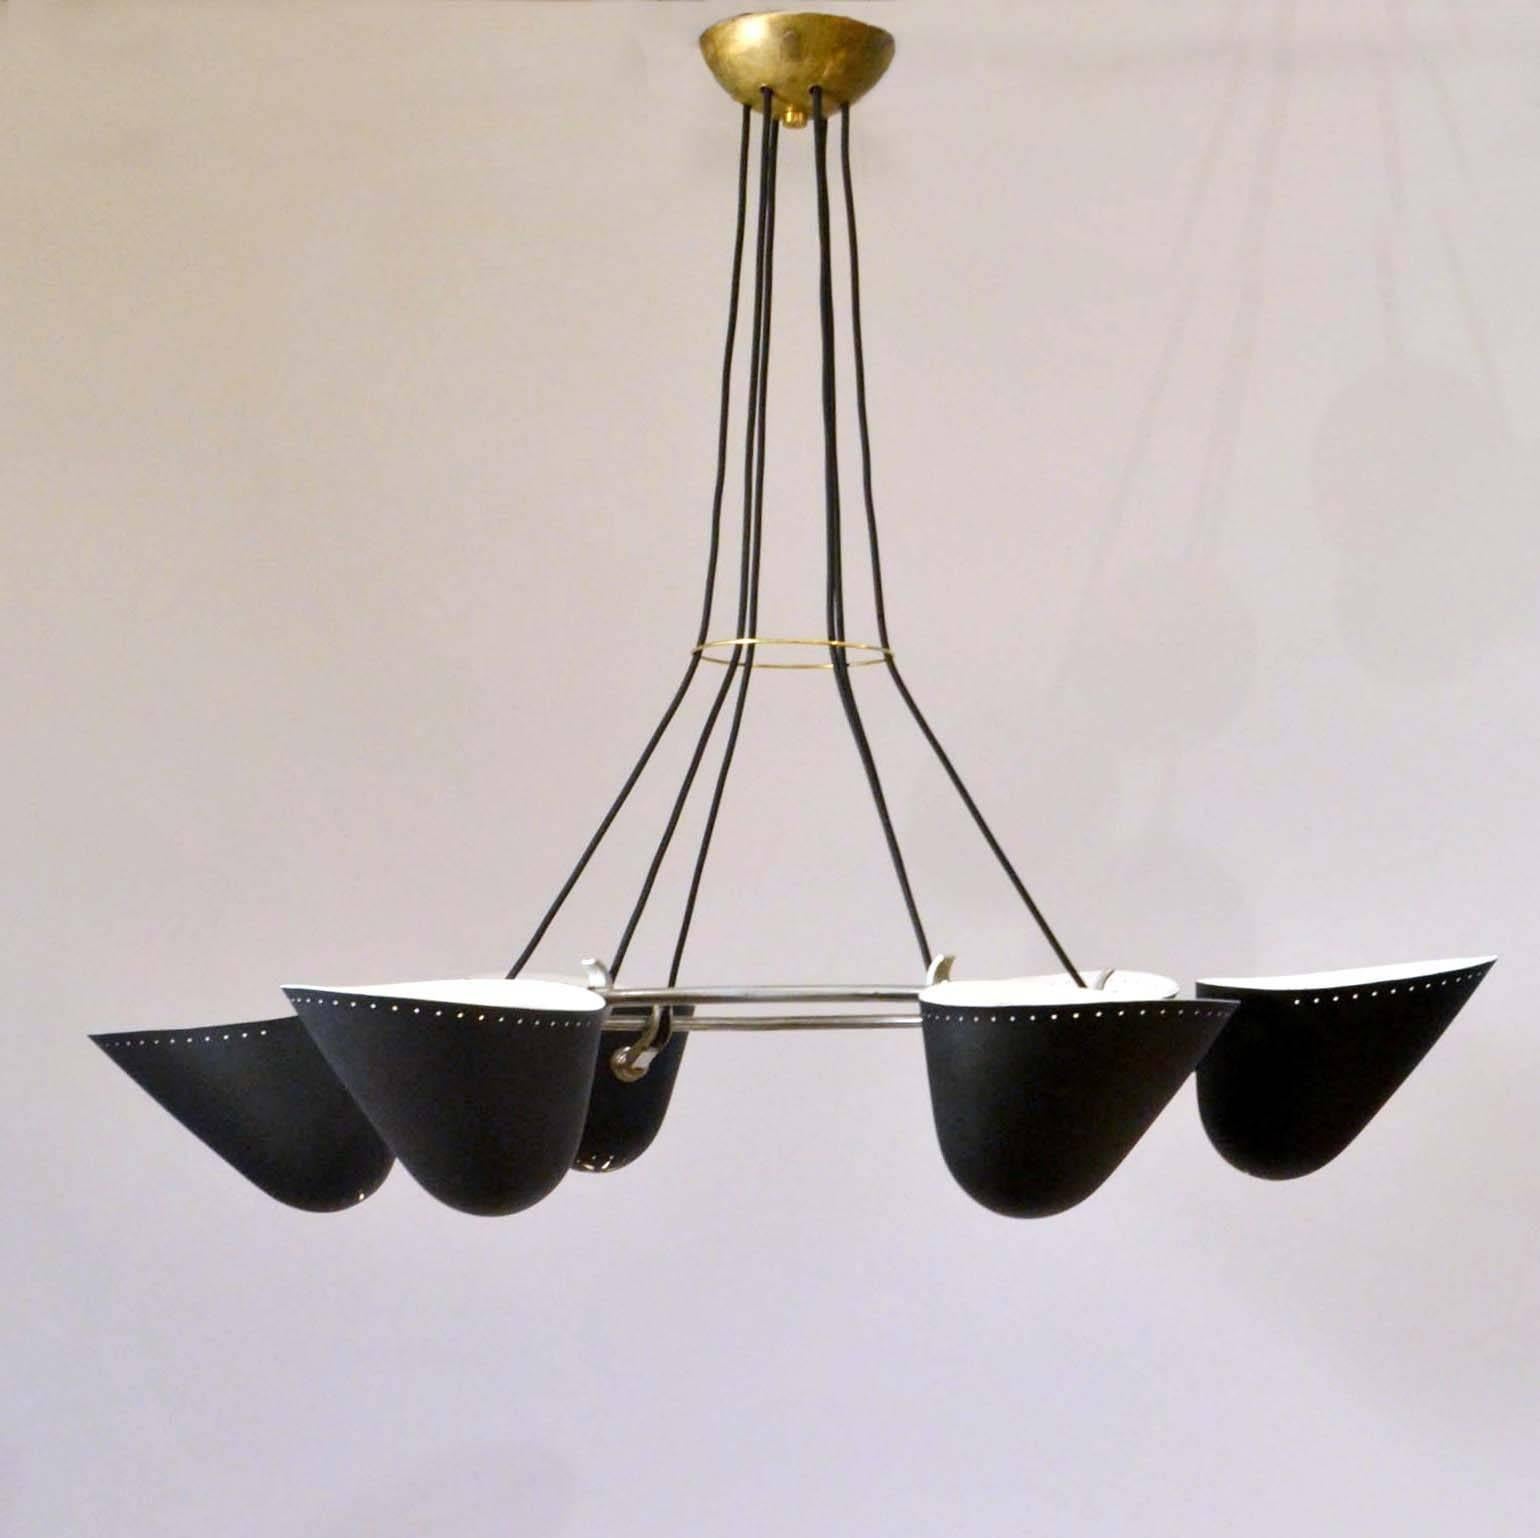 Mid-20th Century Large Pair of 1950s Black Metal Chandeliers by A.B. Read for Troughton & Young